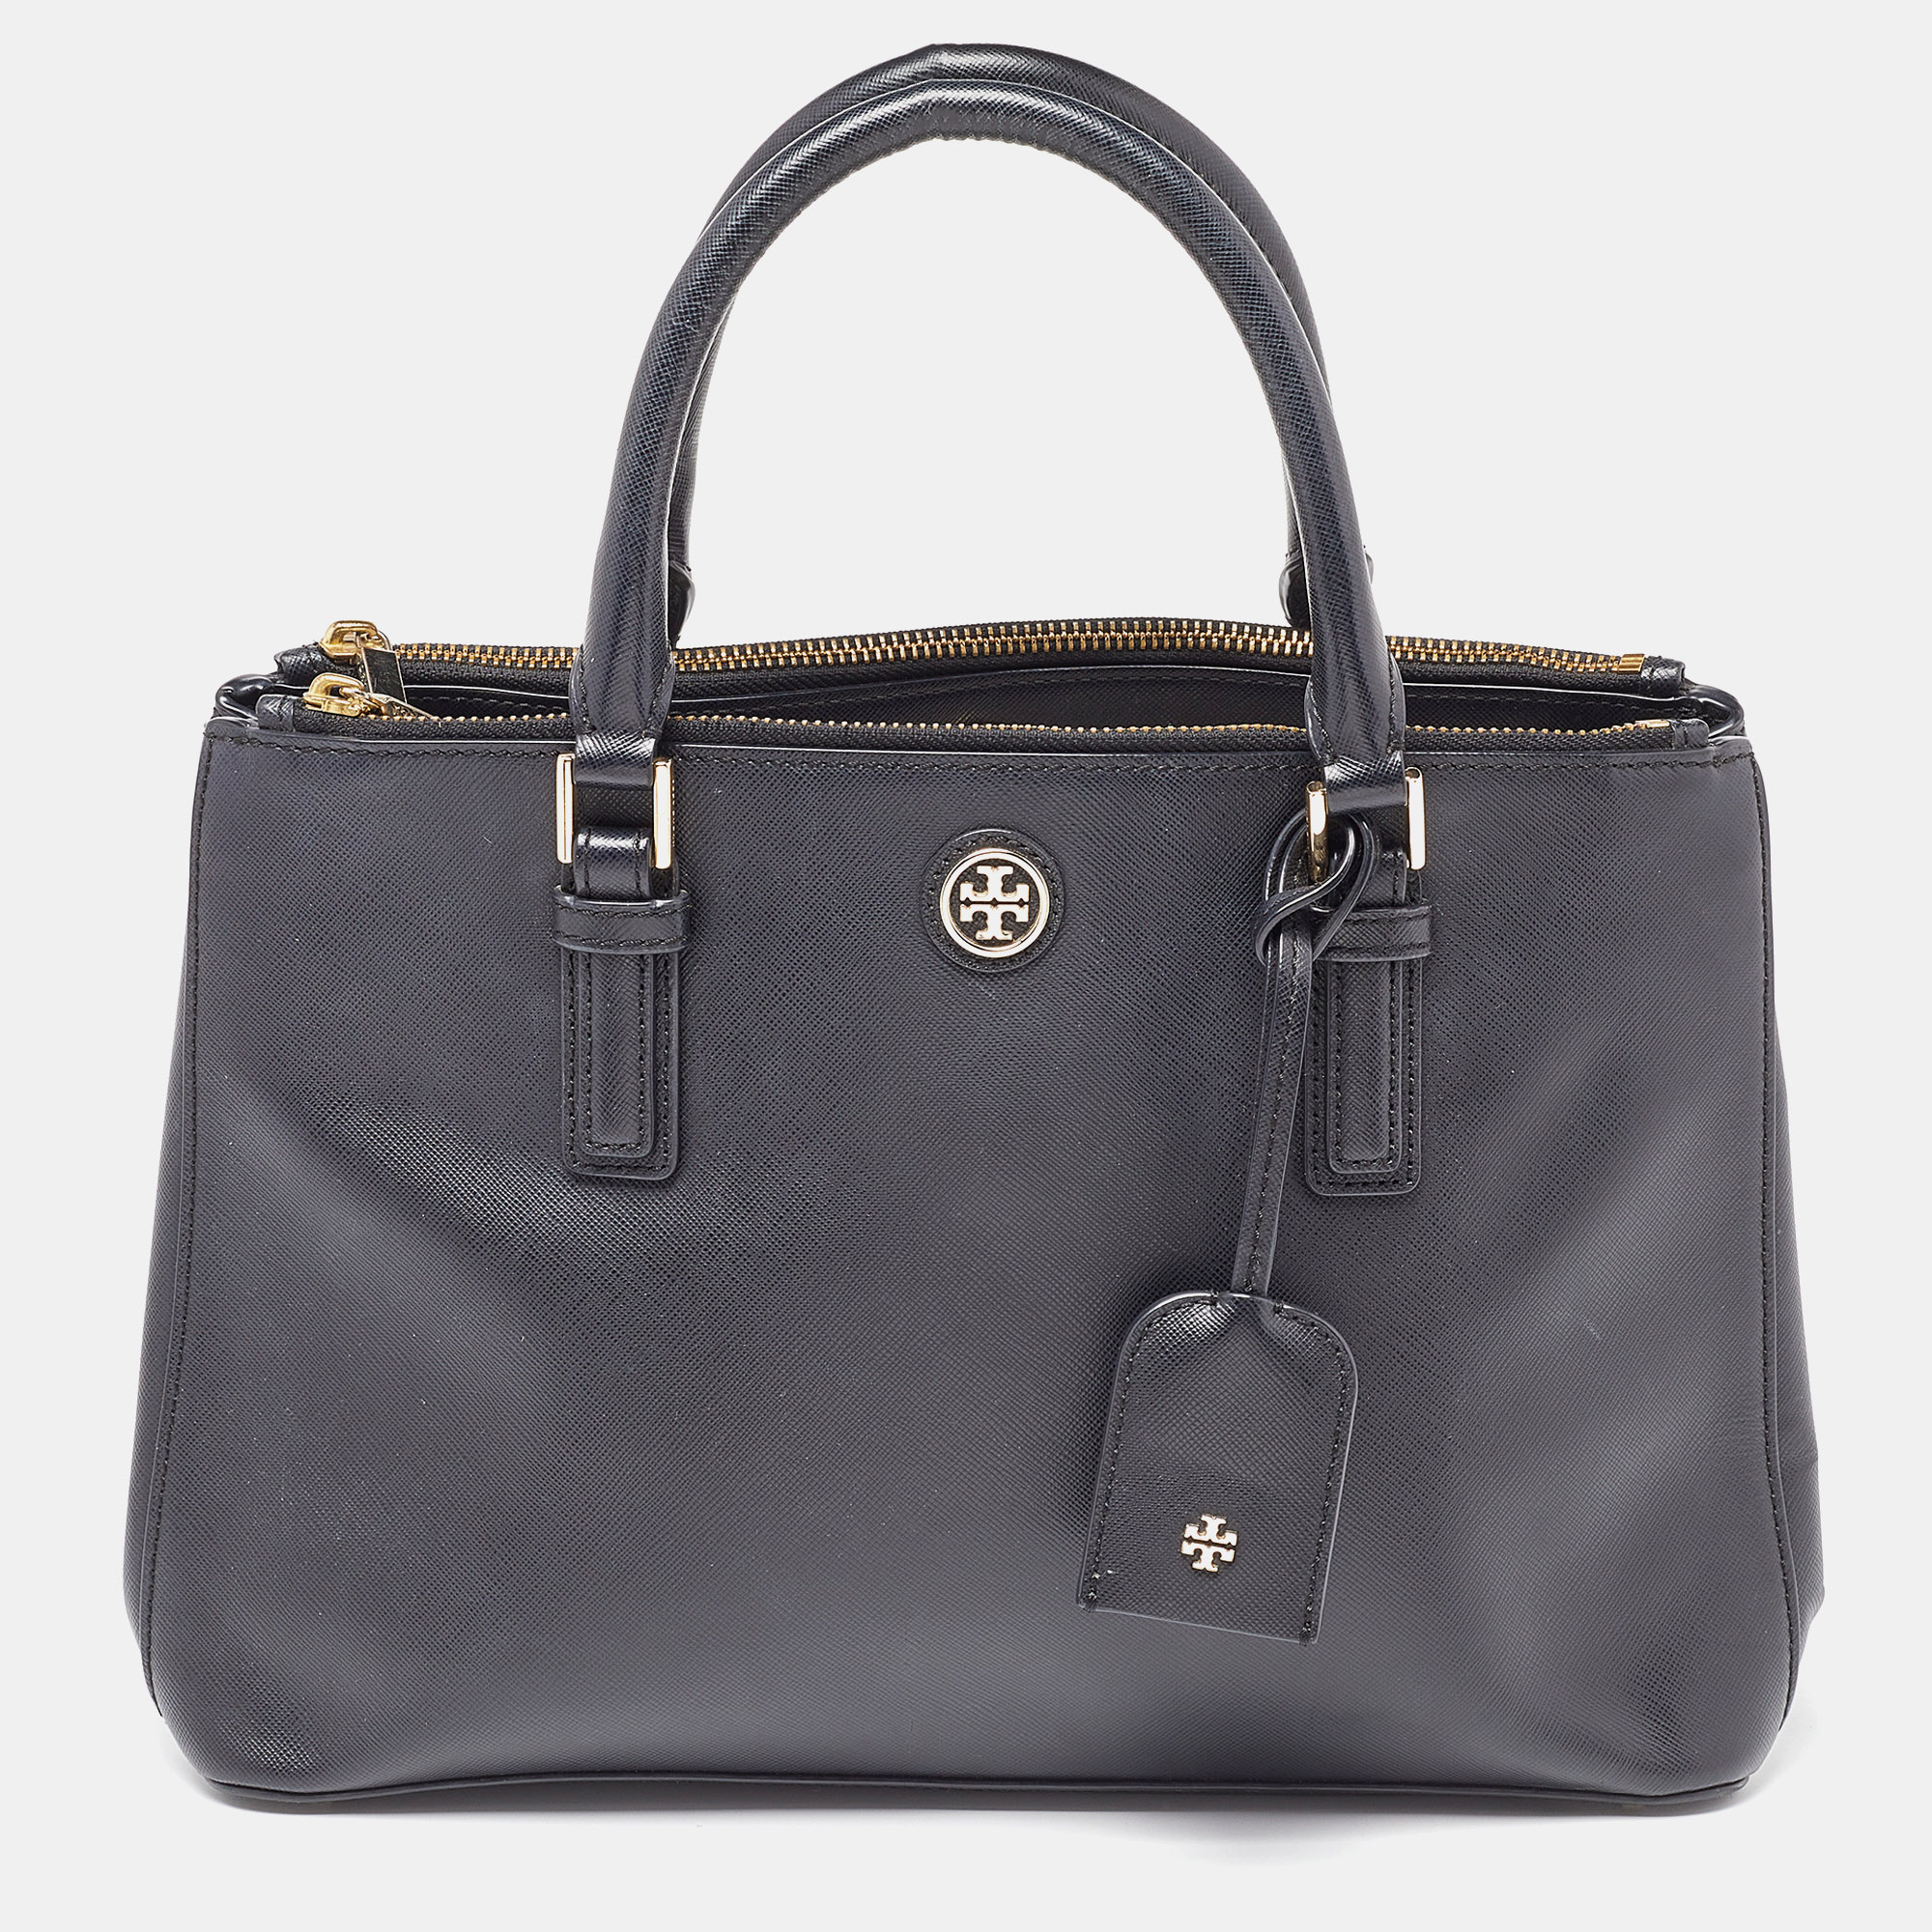 Tory burch black leather double zip robinson tote